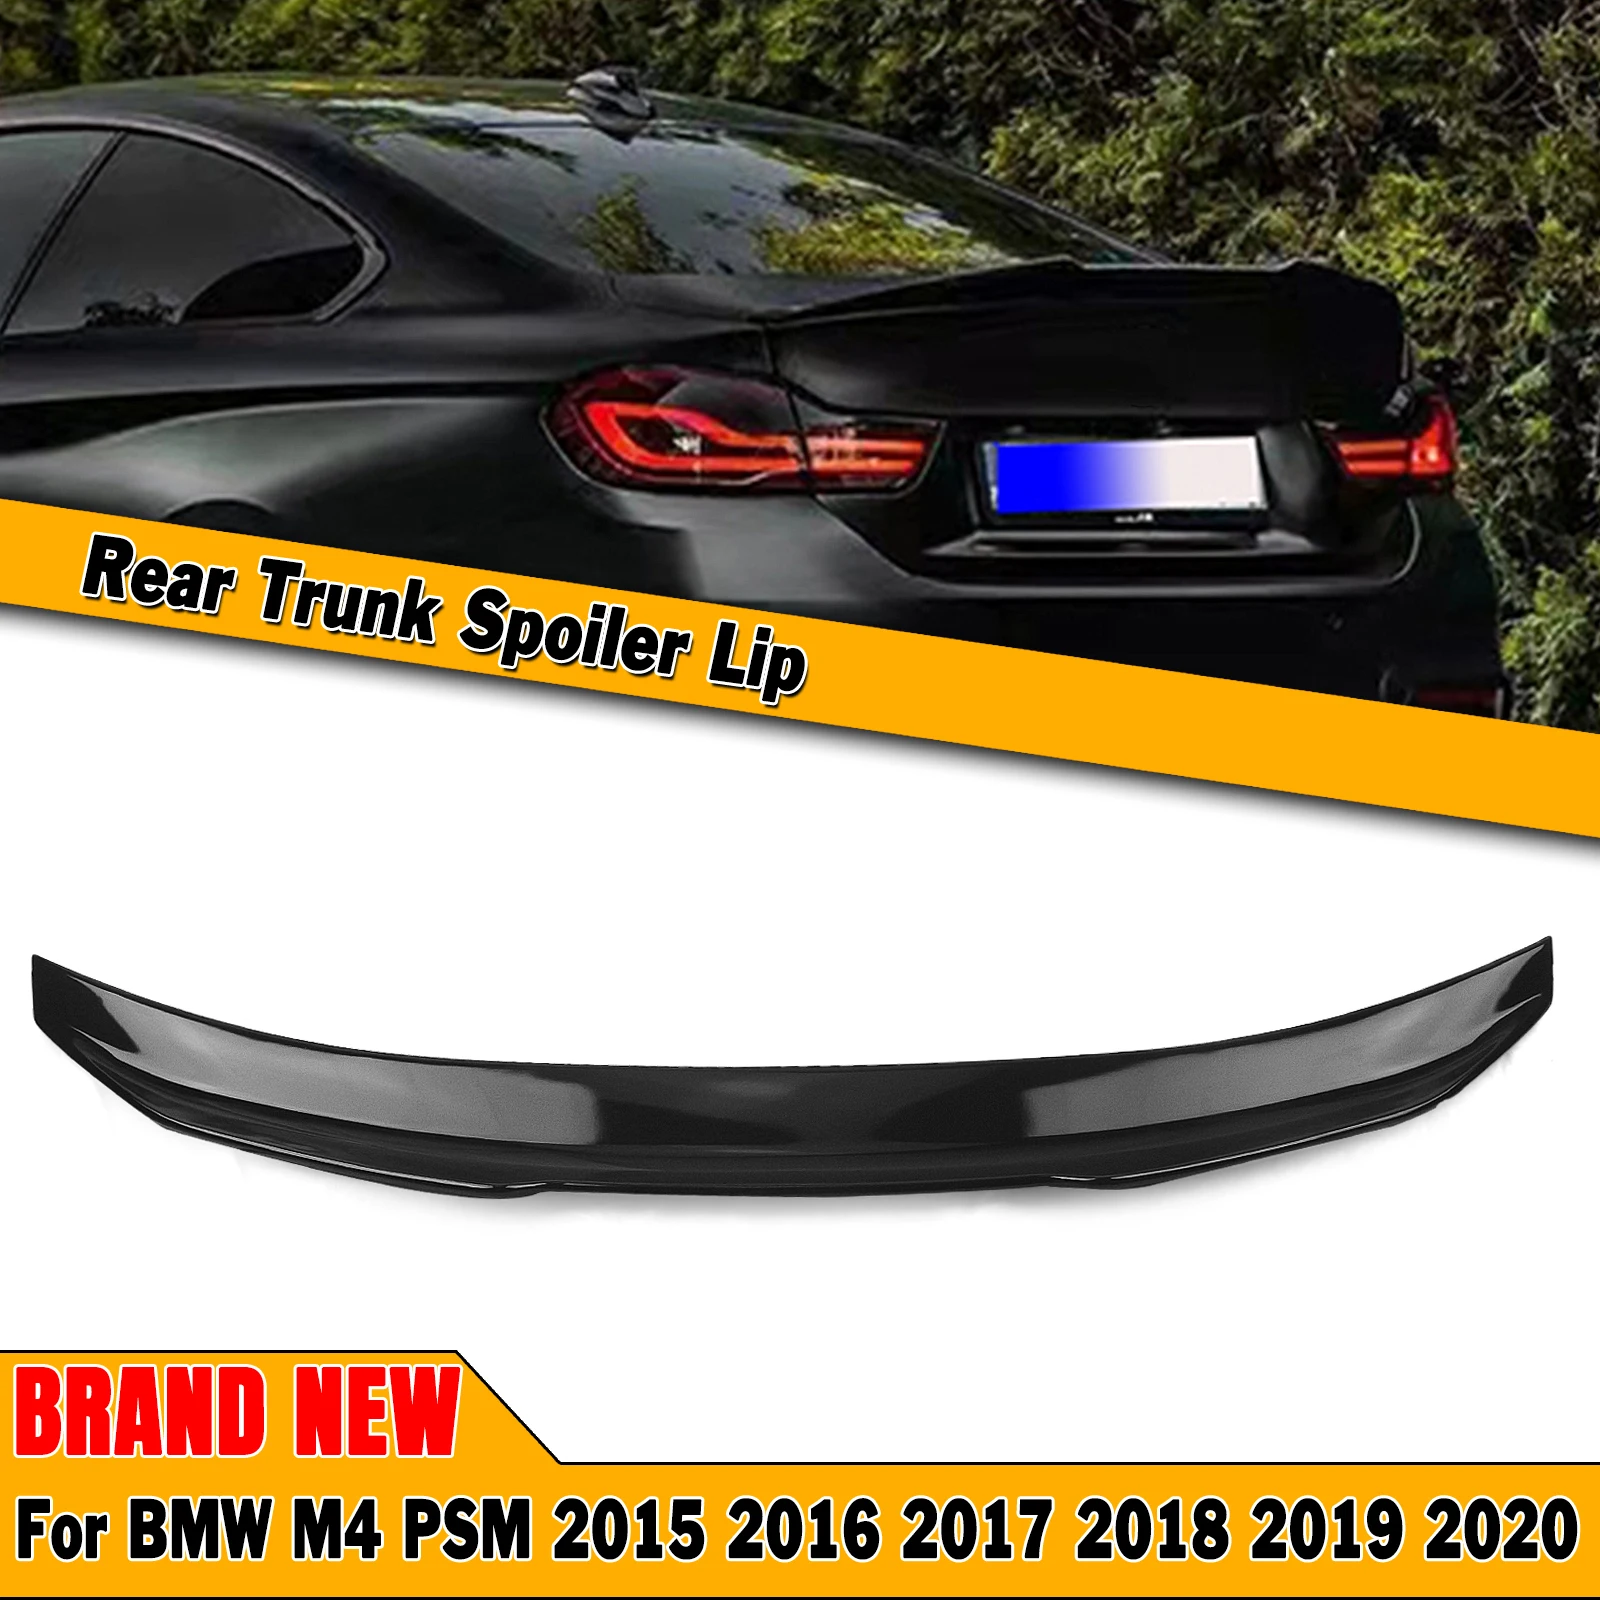 

Rear Trunk Spoiler Wing For BMW F82 M4 2015-2020 2 Door Coupe PSM Style High-Kick Glossy Black Car Tailgate Decklid Splitter Lip